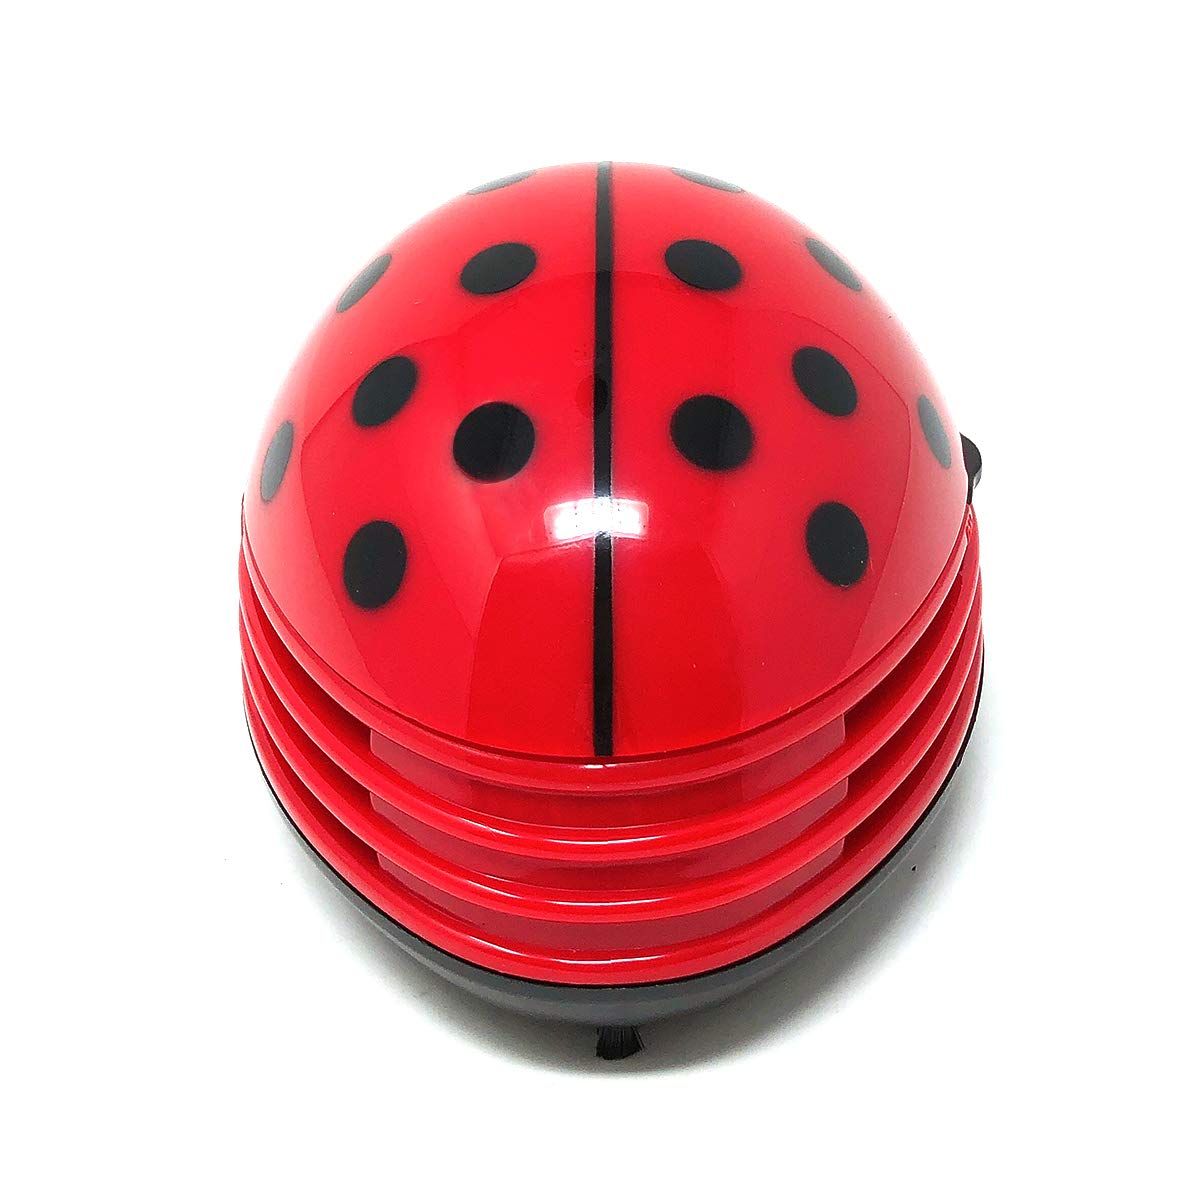 allydrew Cute Portable Mini Vacuum Cleaner for Home and Office, Ladybug